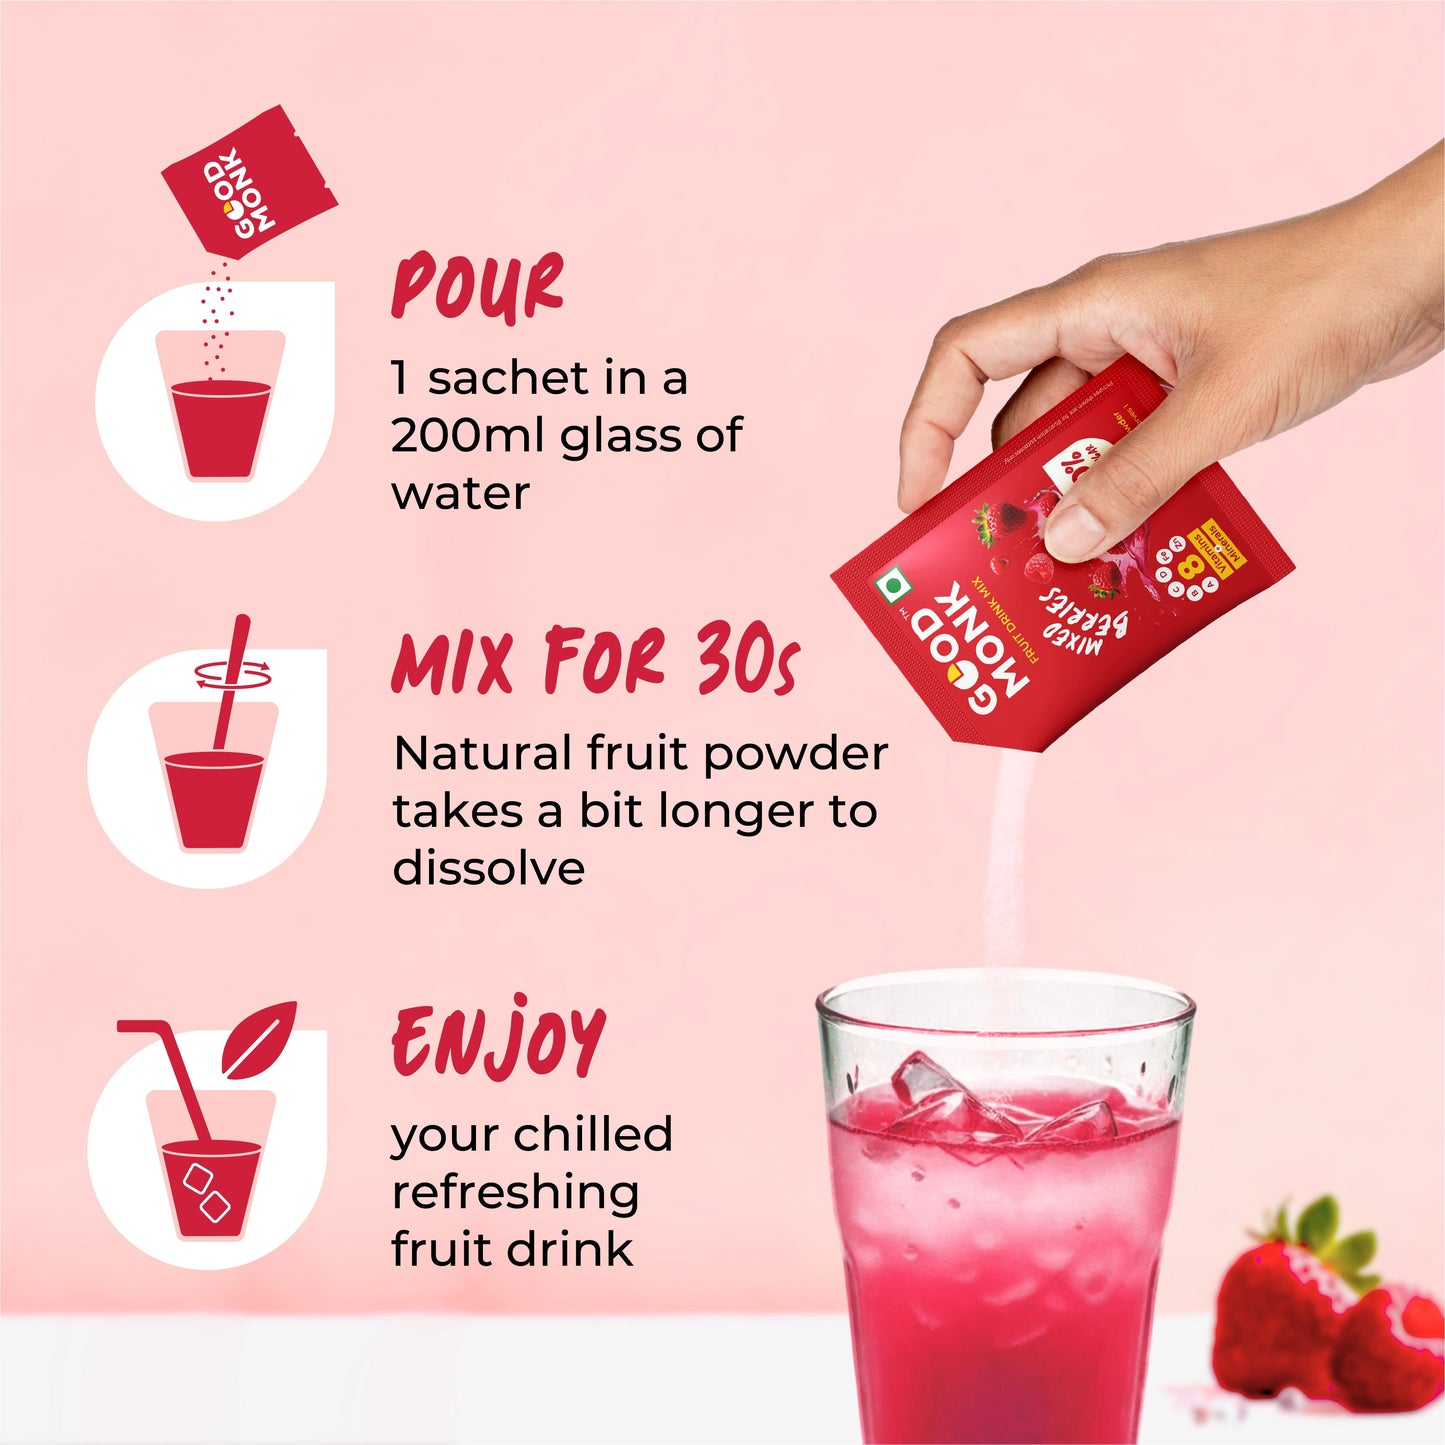 Instant Fruit Drink Mix - Natural Mixed Berries Powder, 50% Less Sugar, With 8 Vitamins & Minerals